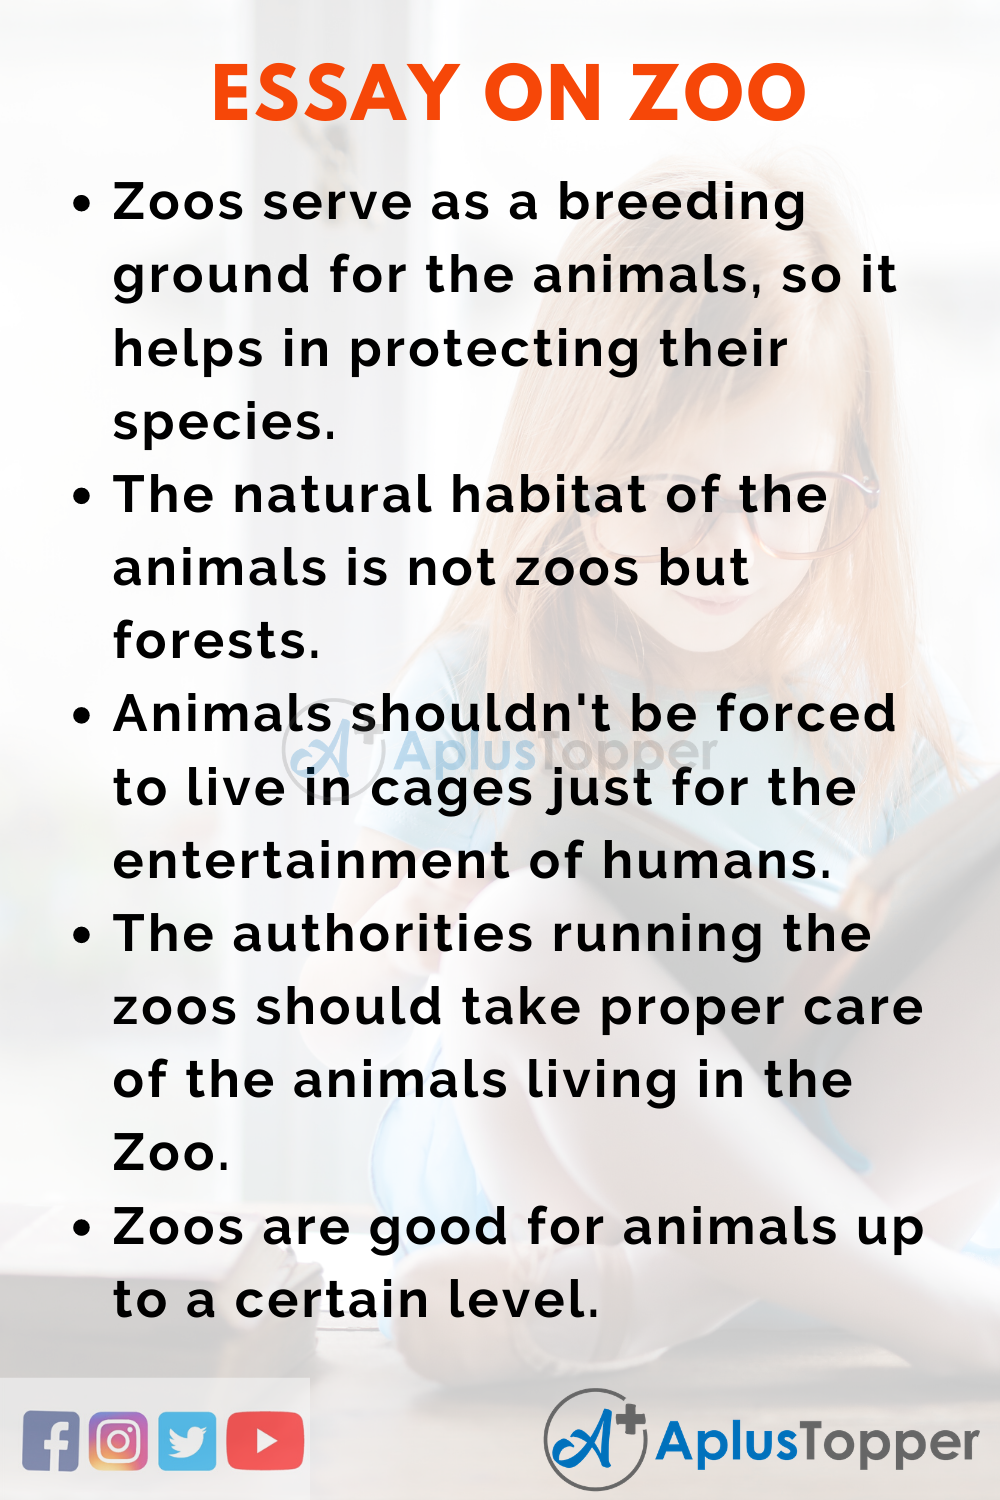 a visit to zoo essay for class 8